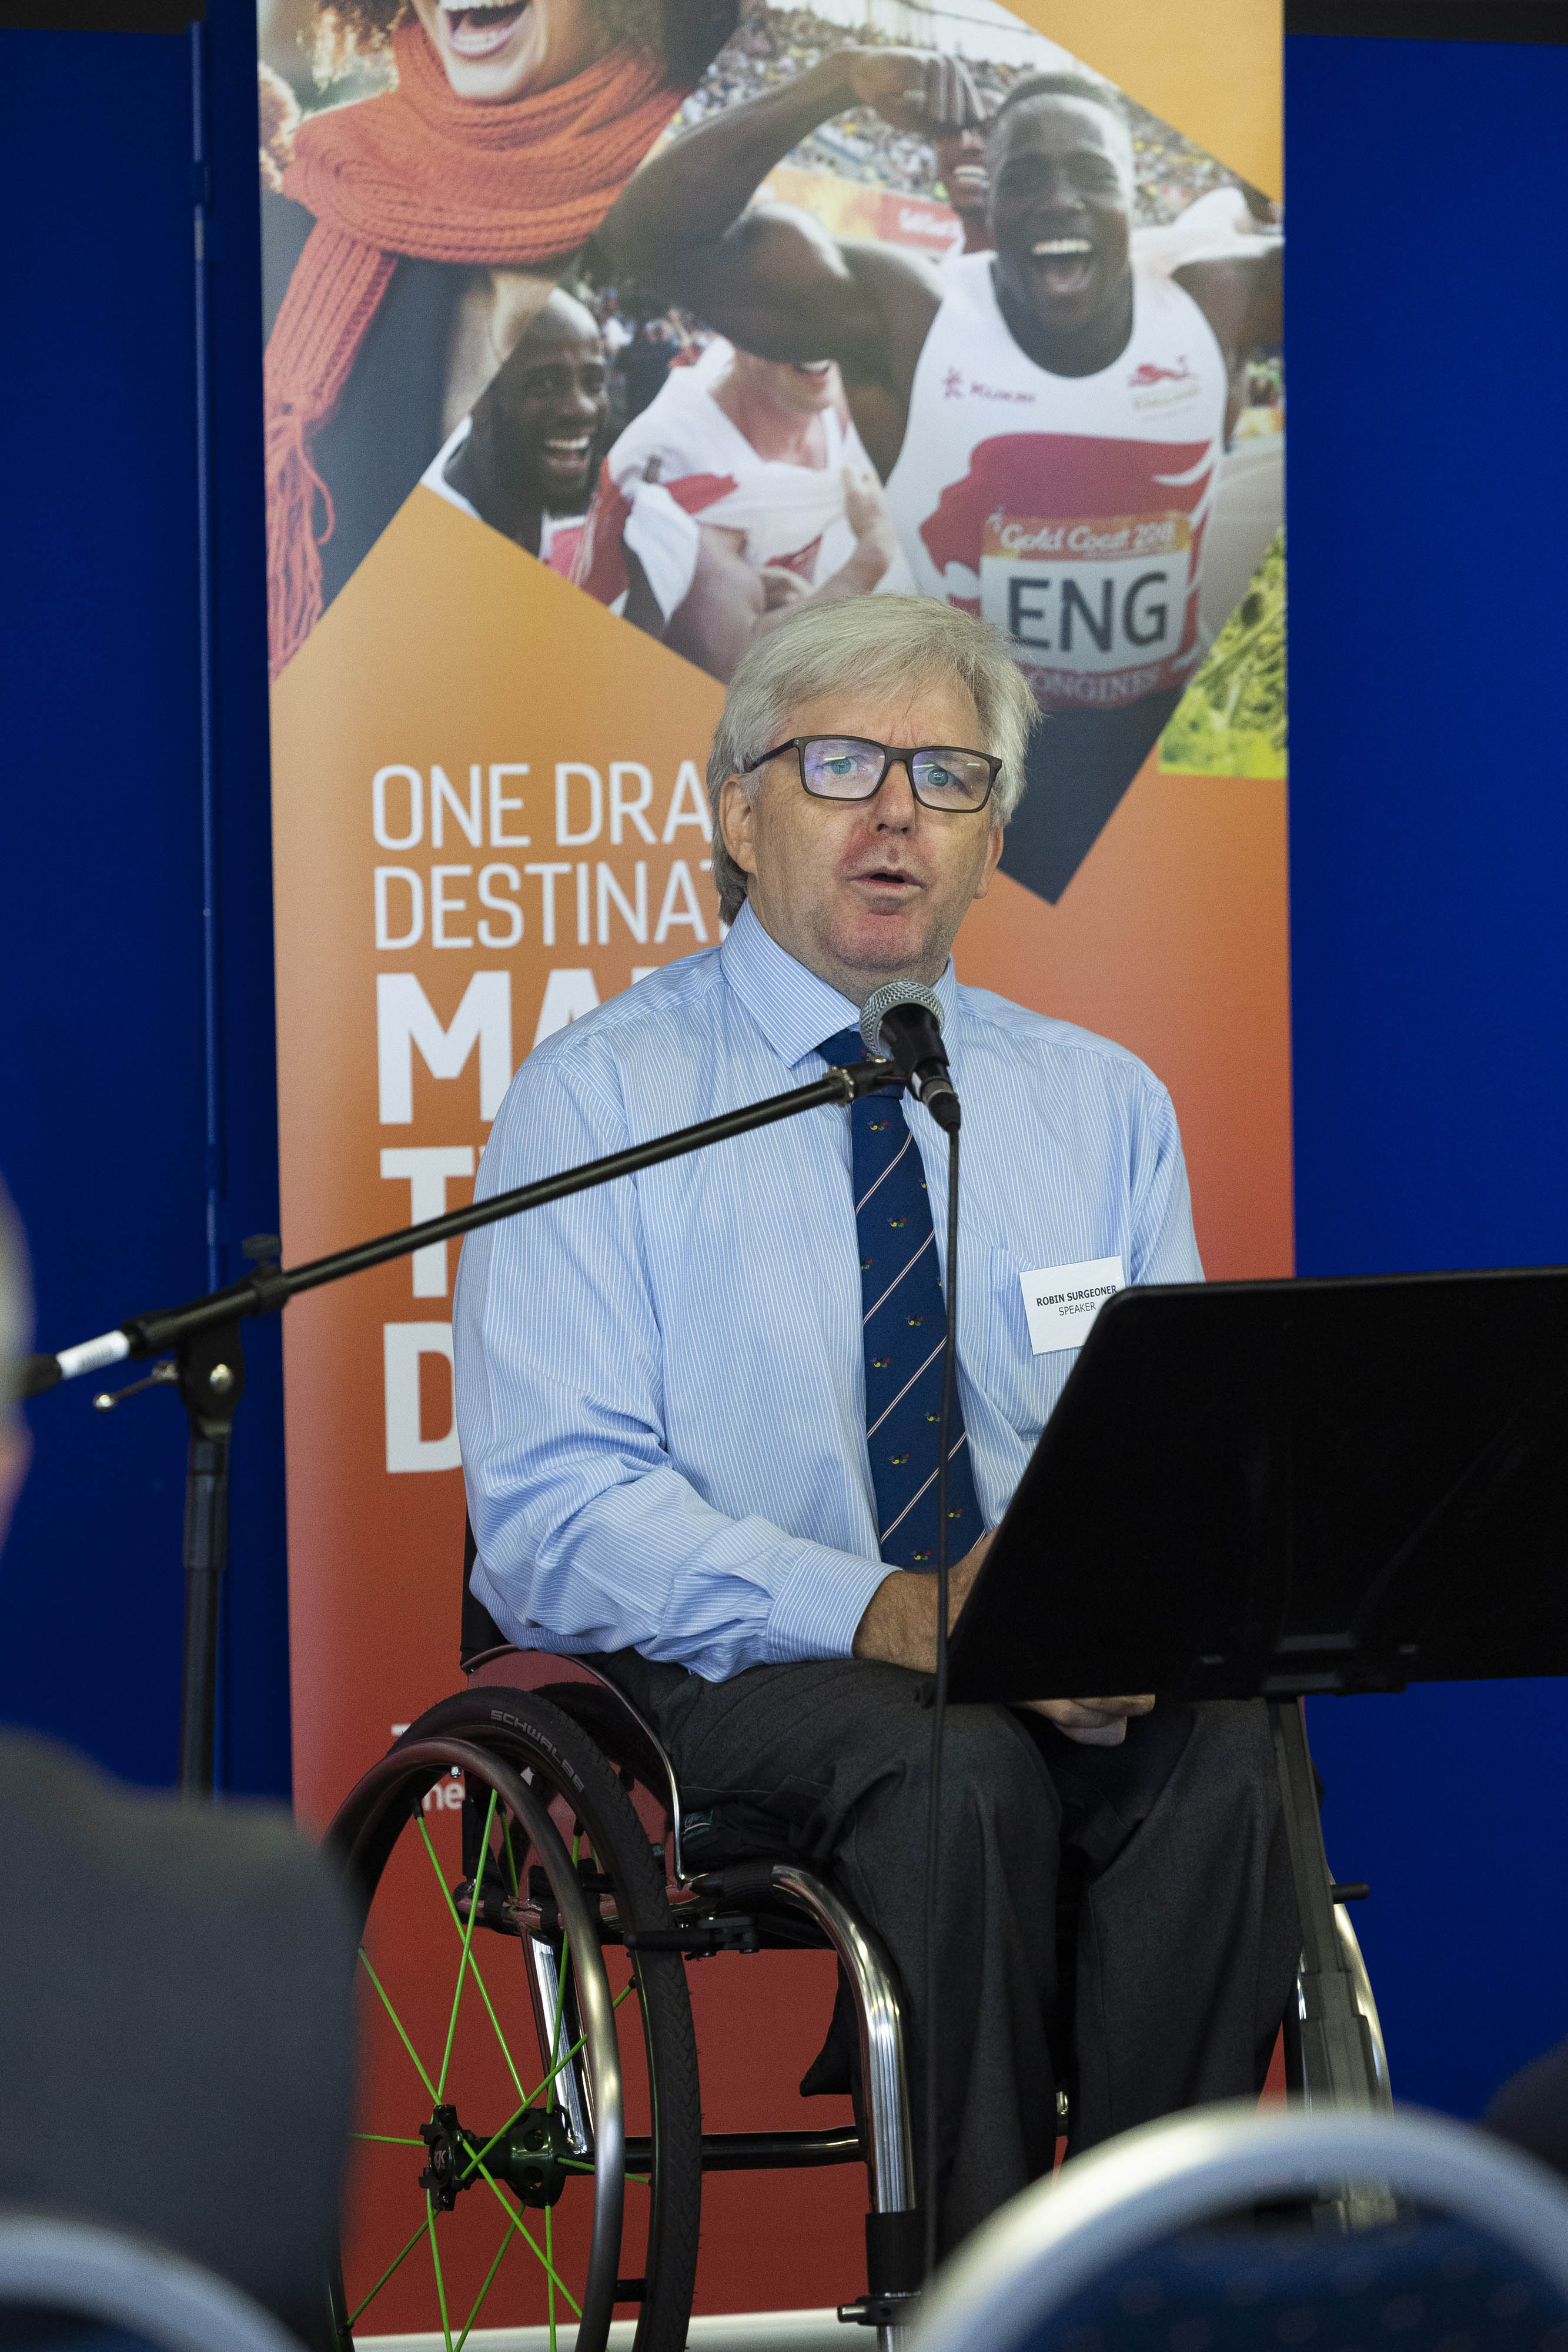 Para athlete and cultural performer Robin Surgeoner told delegates about the virtues of growing up in the West Midlands